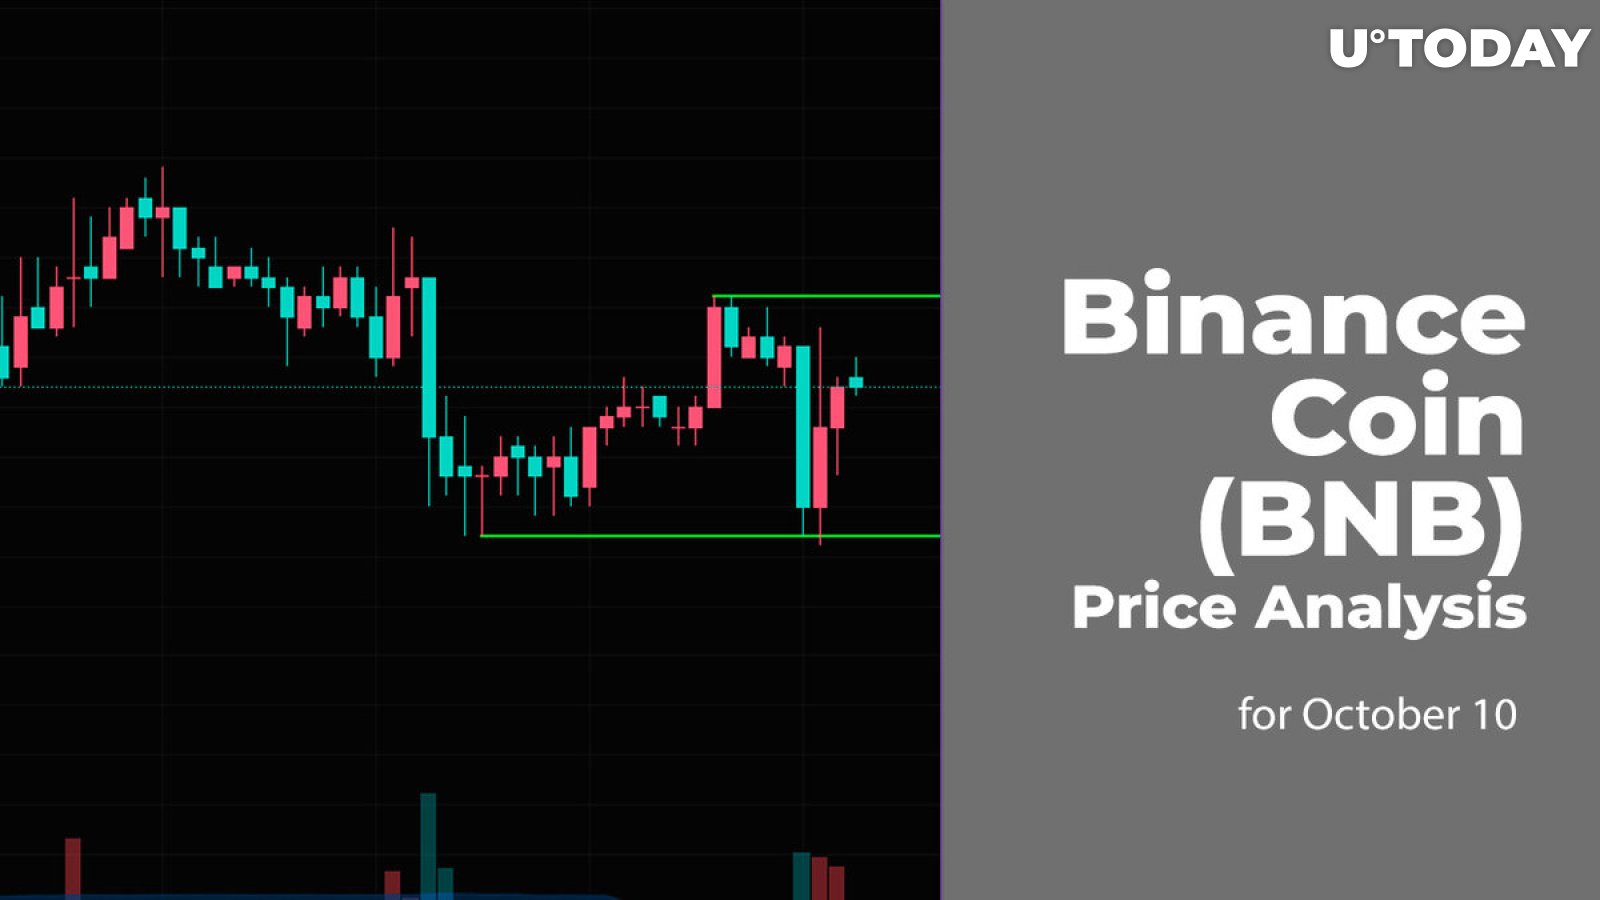 Binance Coin (BNB) Price Analysis for October 10